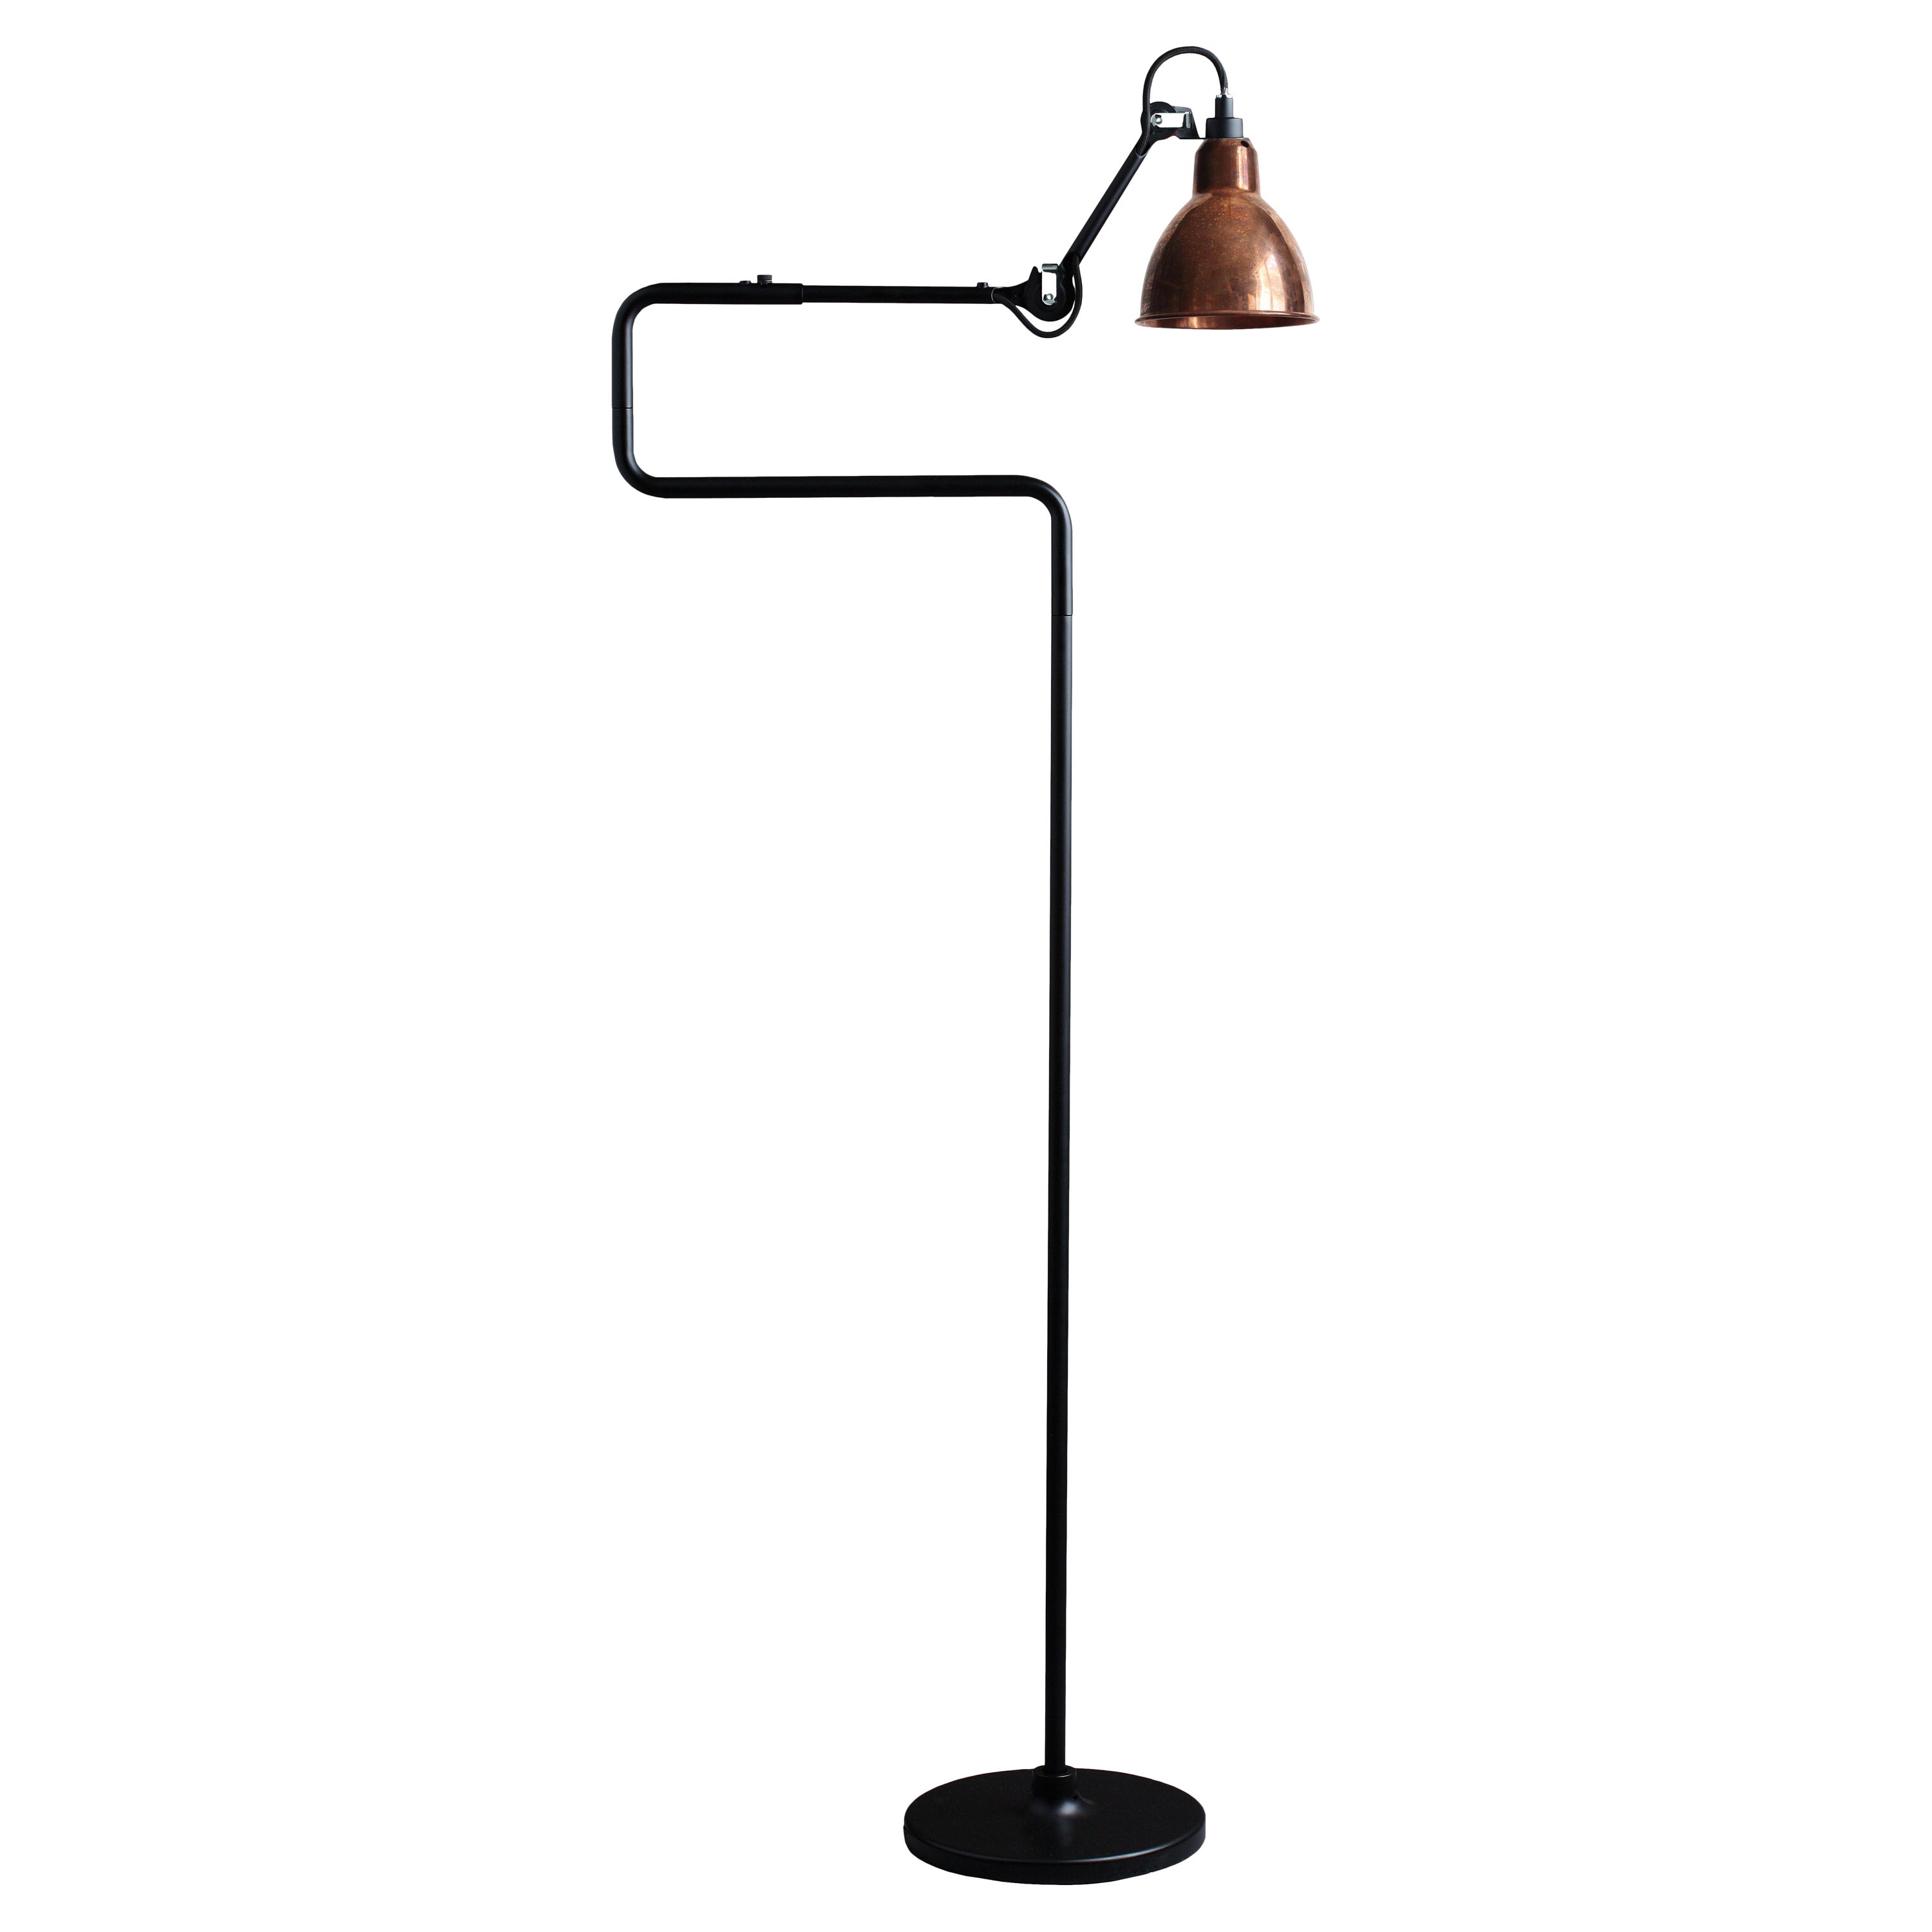 DCW Editions La Lampe Gras N°411 Floor Lamp in Black Arm and Raw Copper Shade For Sale